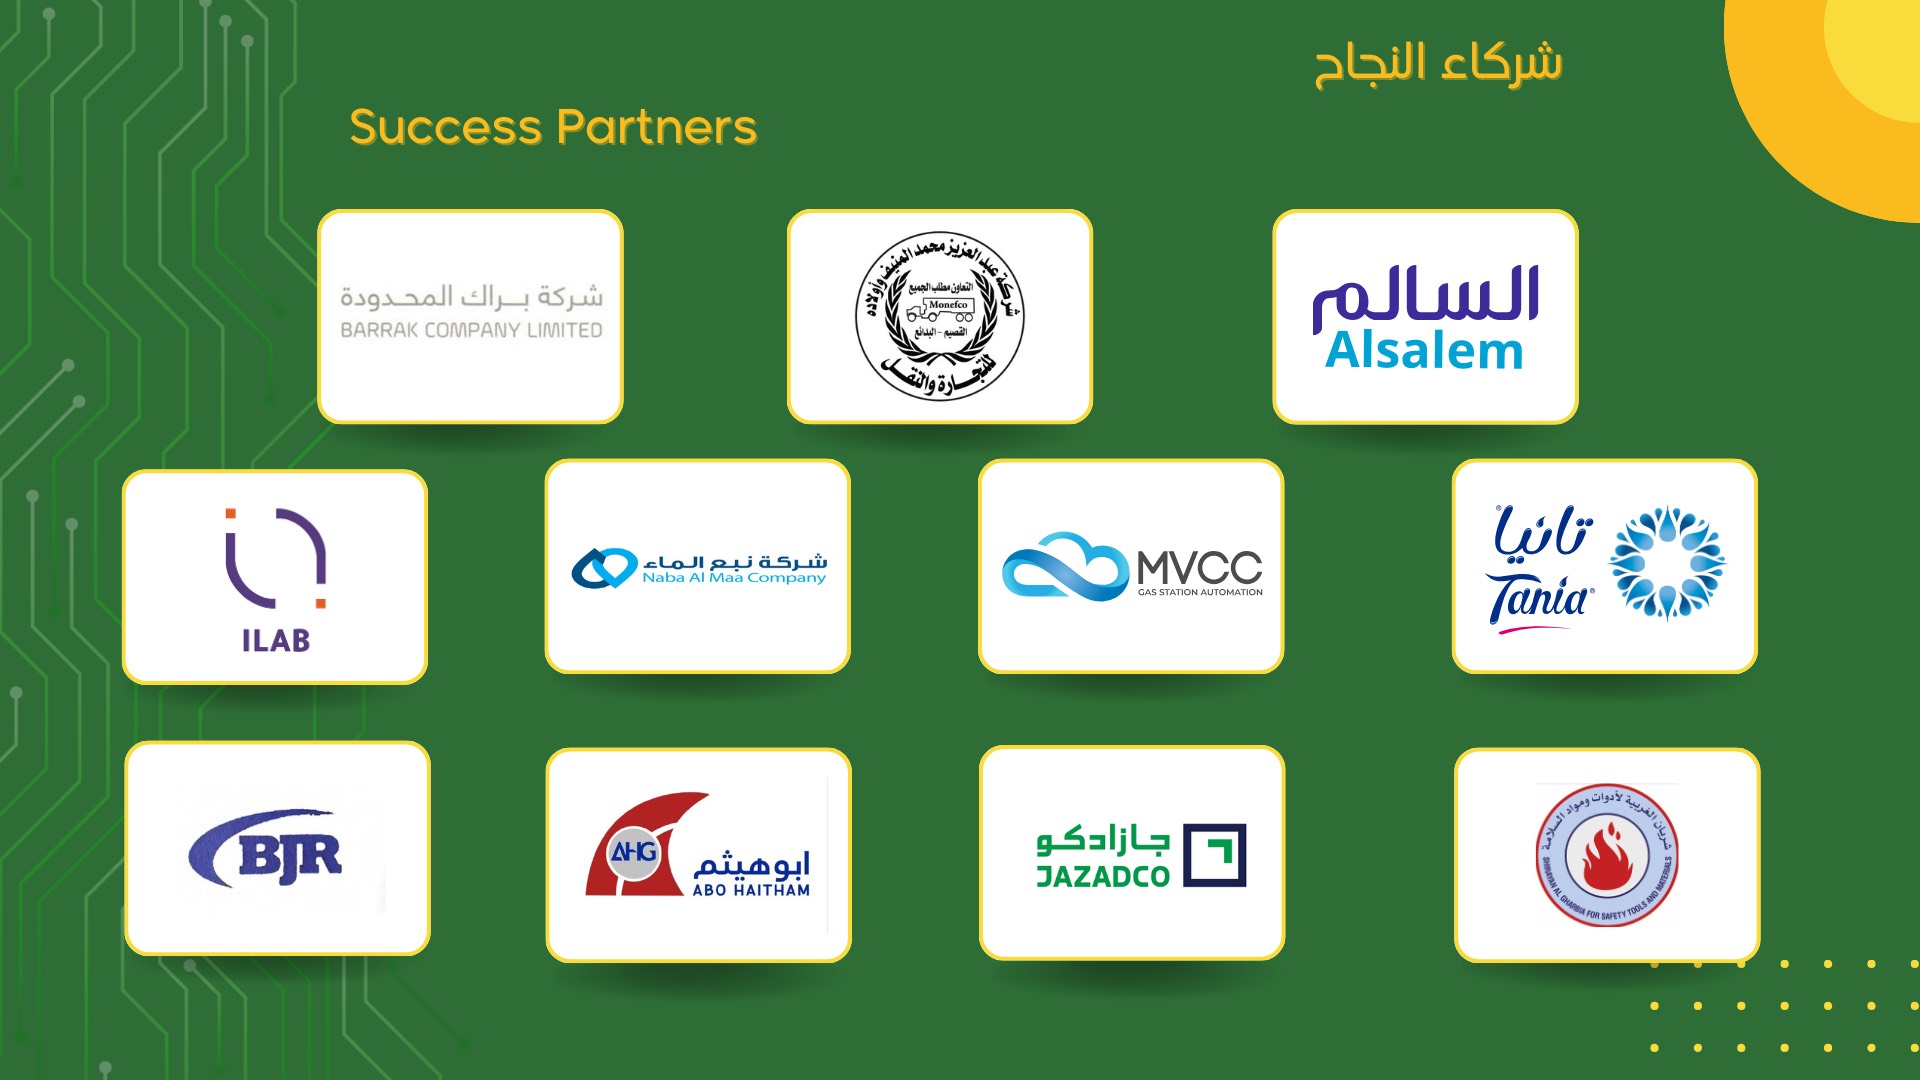 Our Valued Partners